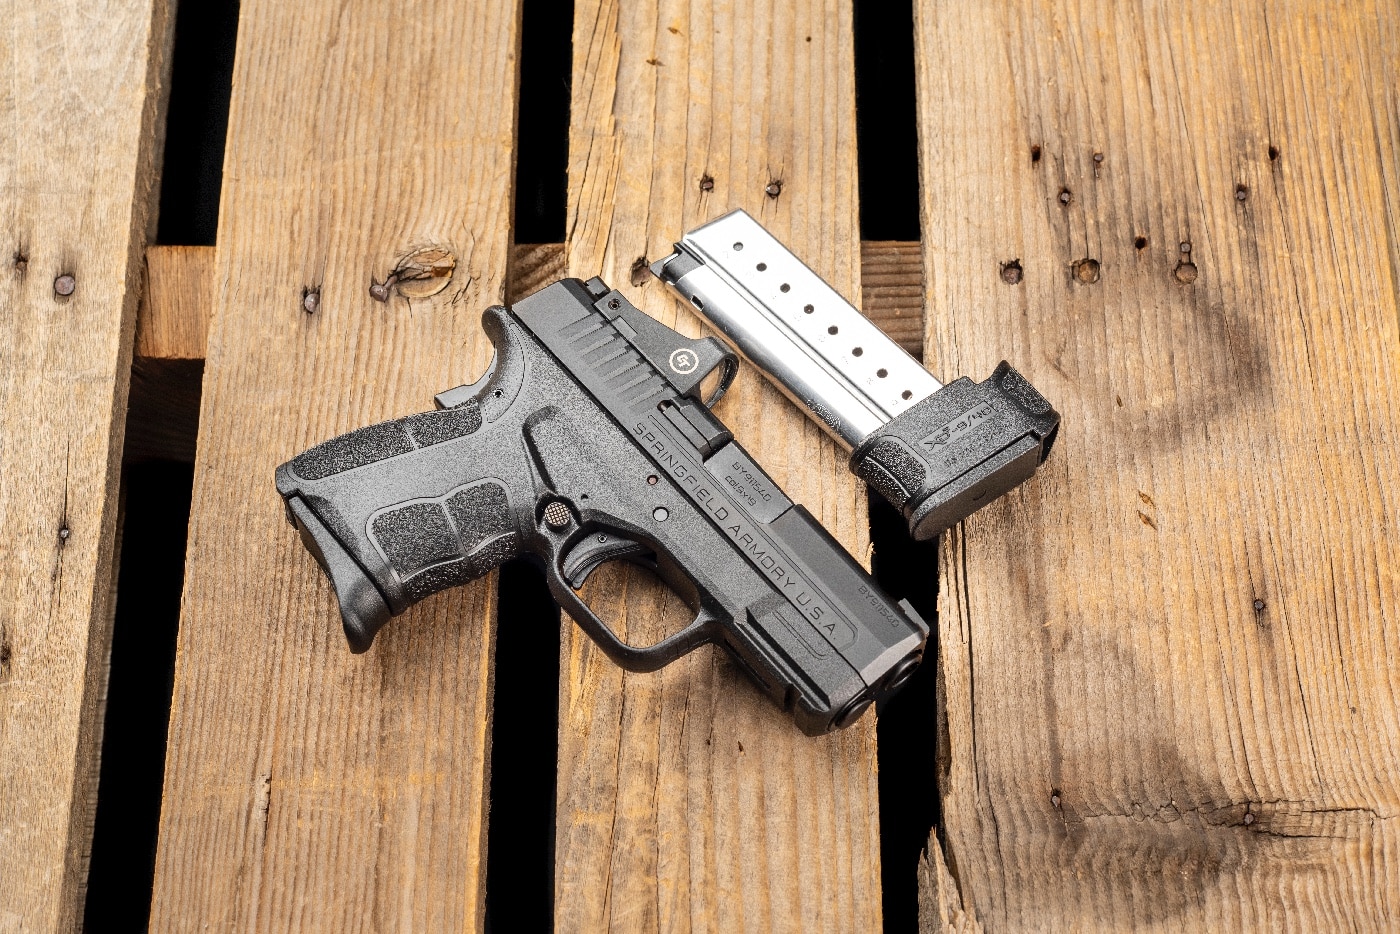 Shown here is a Springfield Armory XD-2 Mod2 pistol and spare magazine.